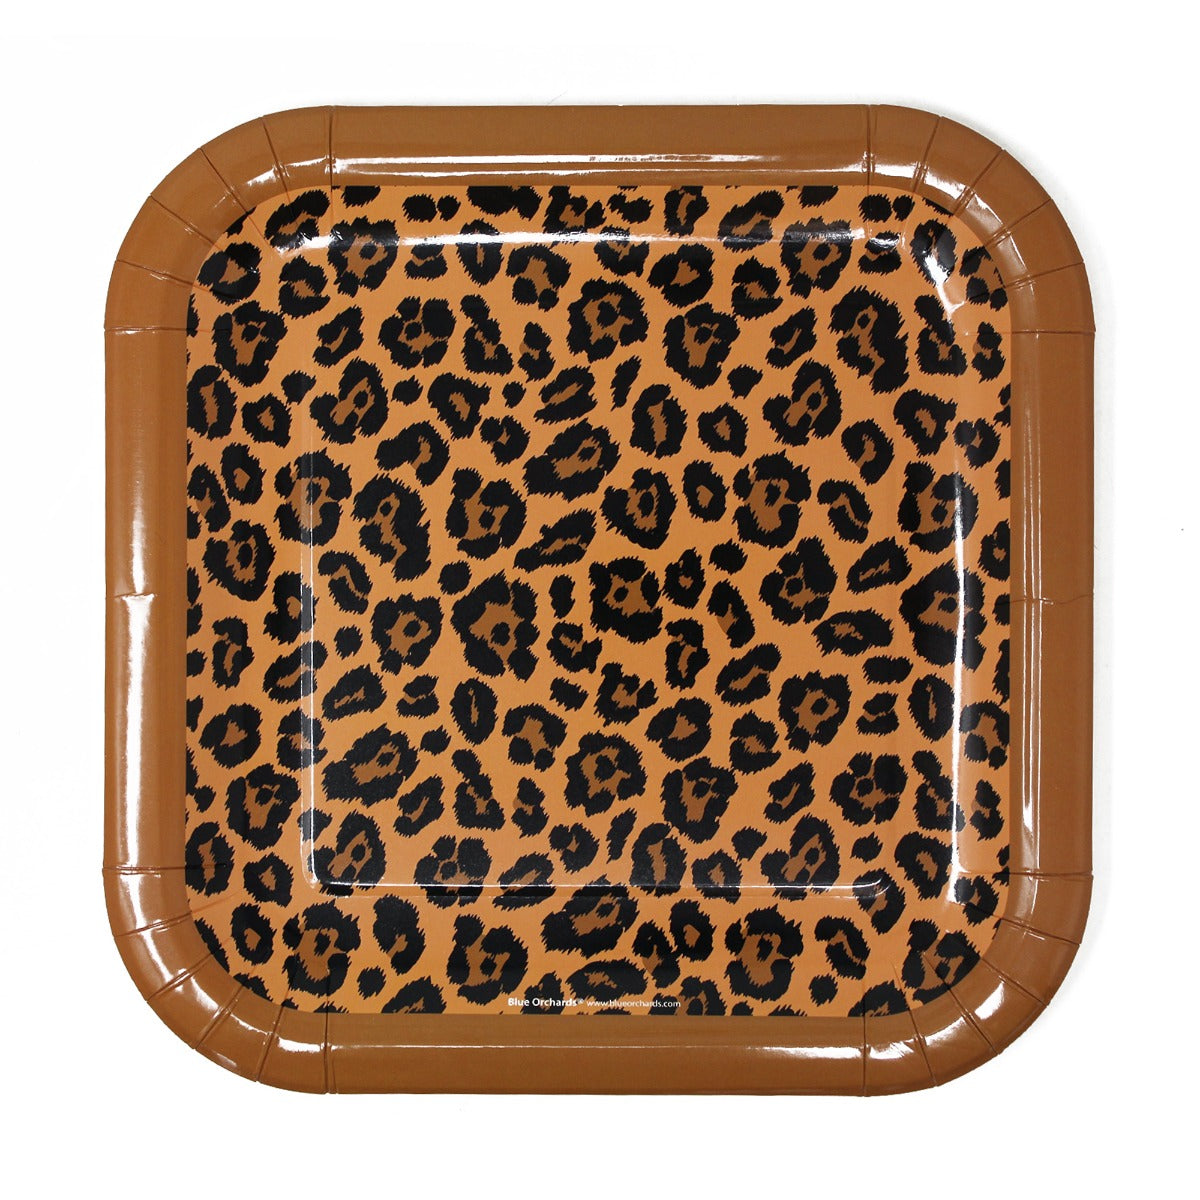 Leopard print 7-inch paper dessert plates, perfect for adding a touch of wild to any party or event.